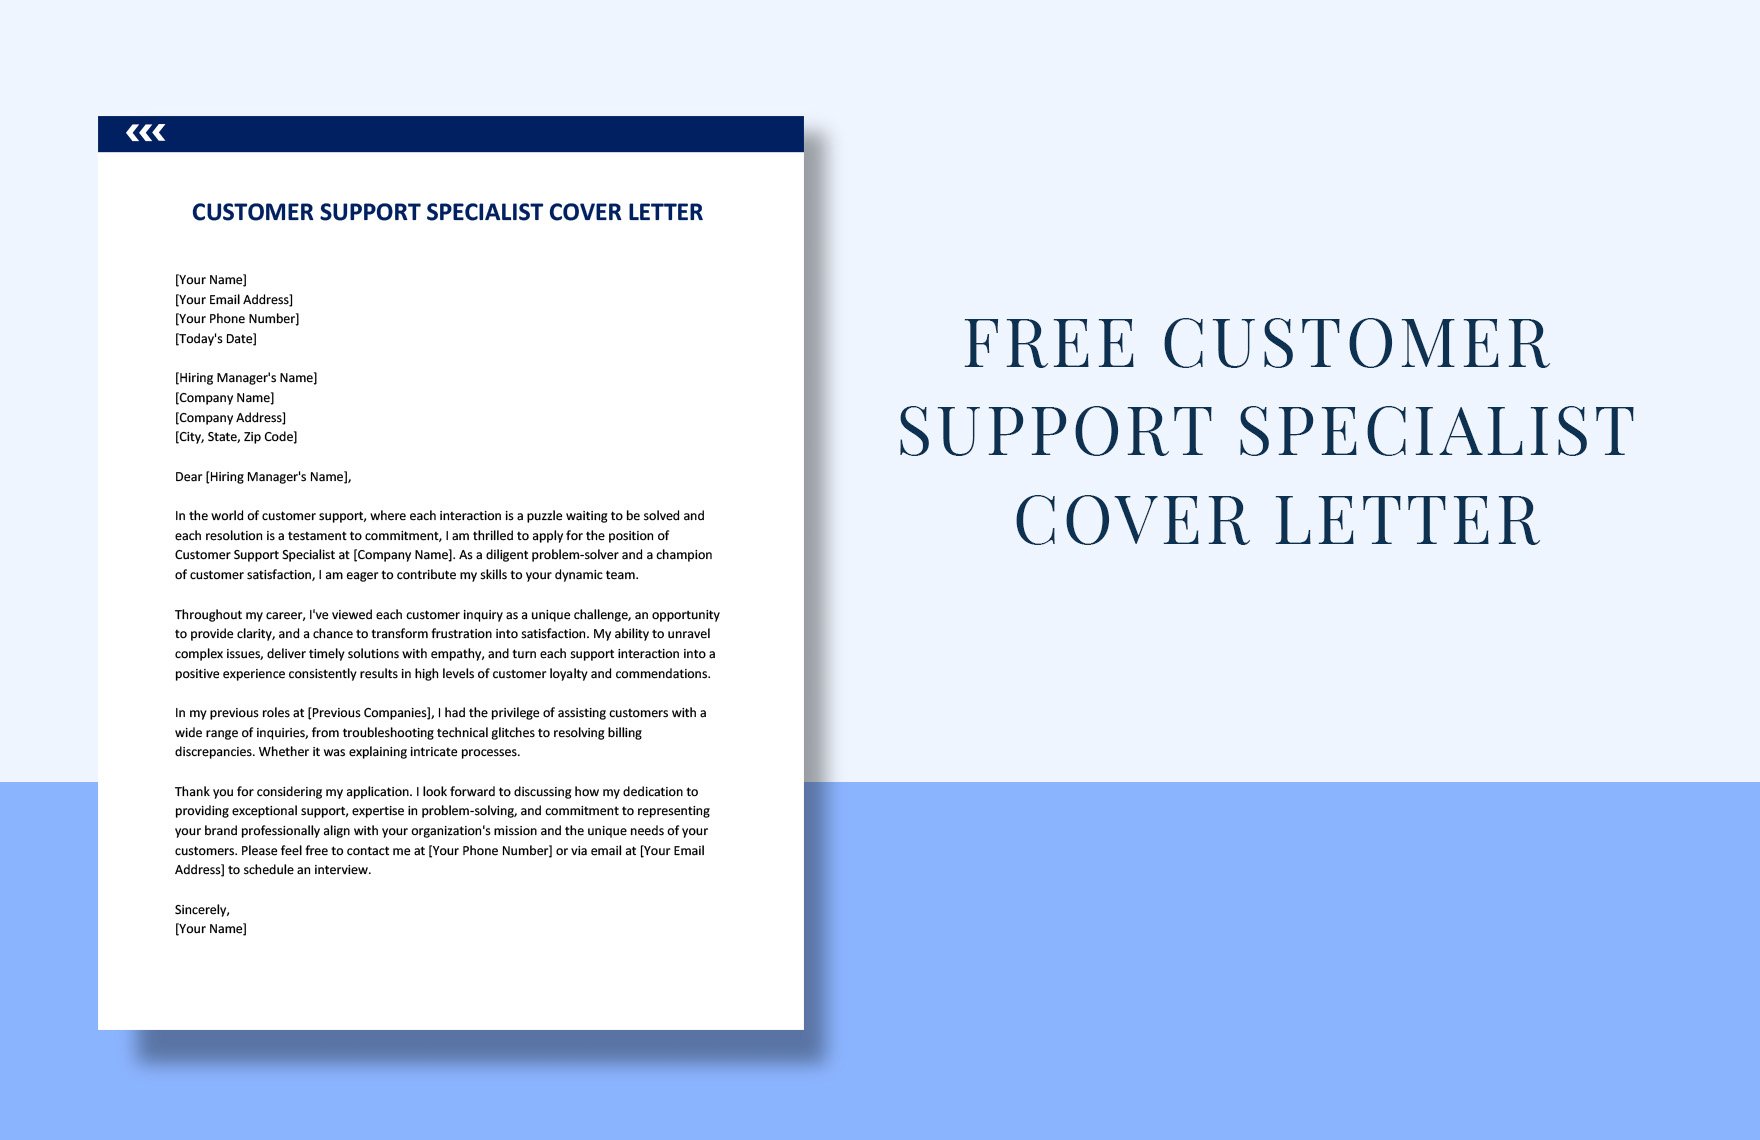 Customer Support Specialist Cover Letter in Word, Google Docs